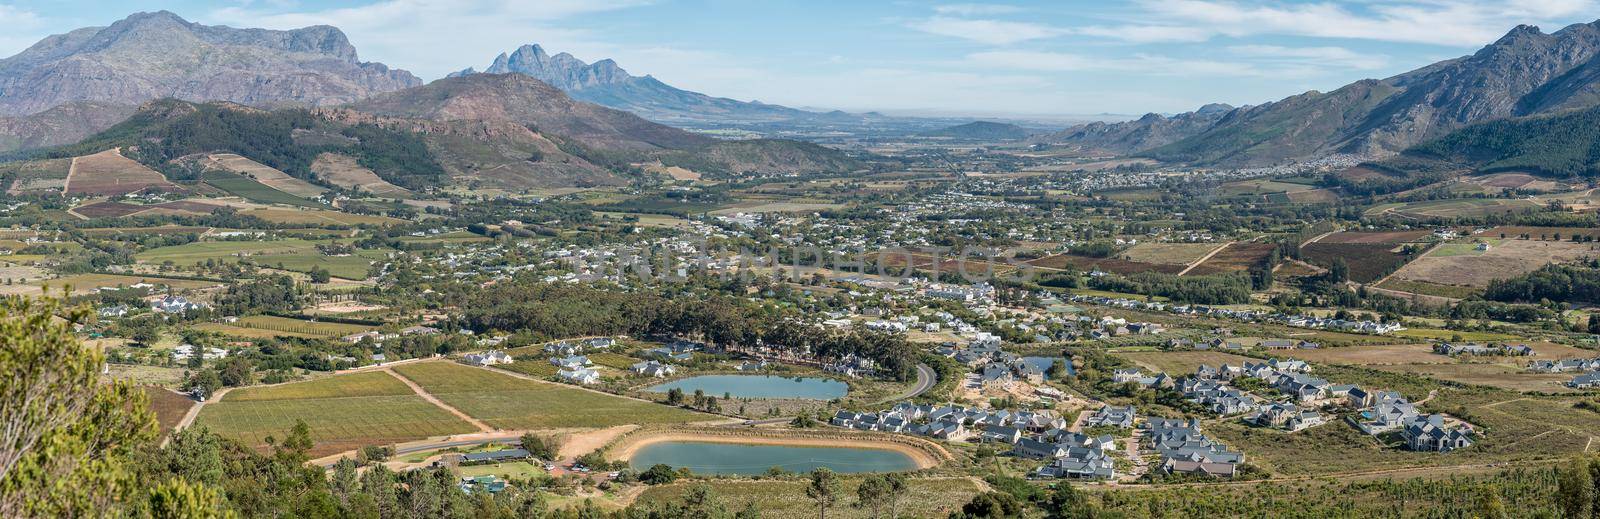 Panoramic view of Franschhoek by dpreezg